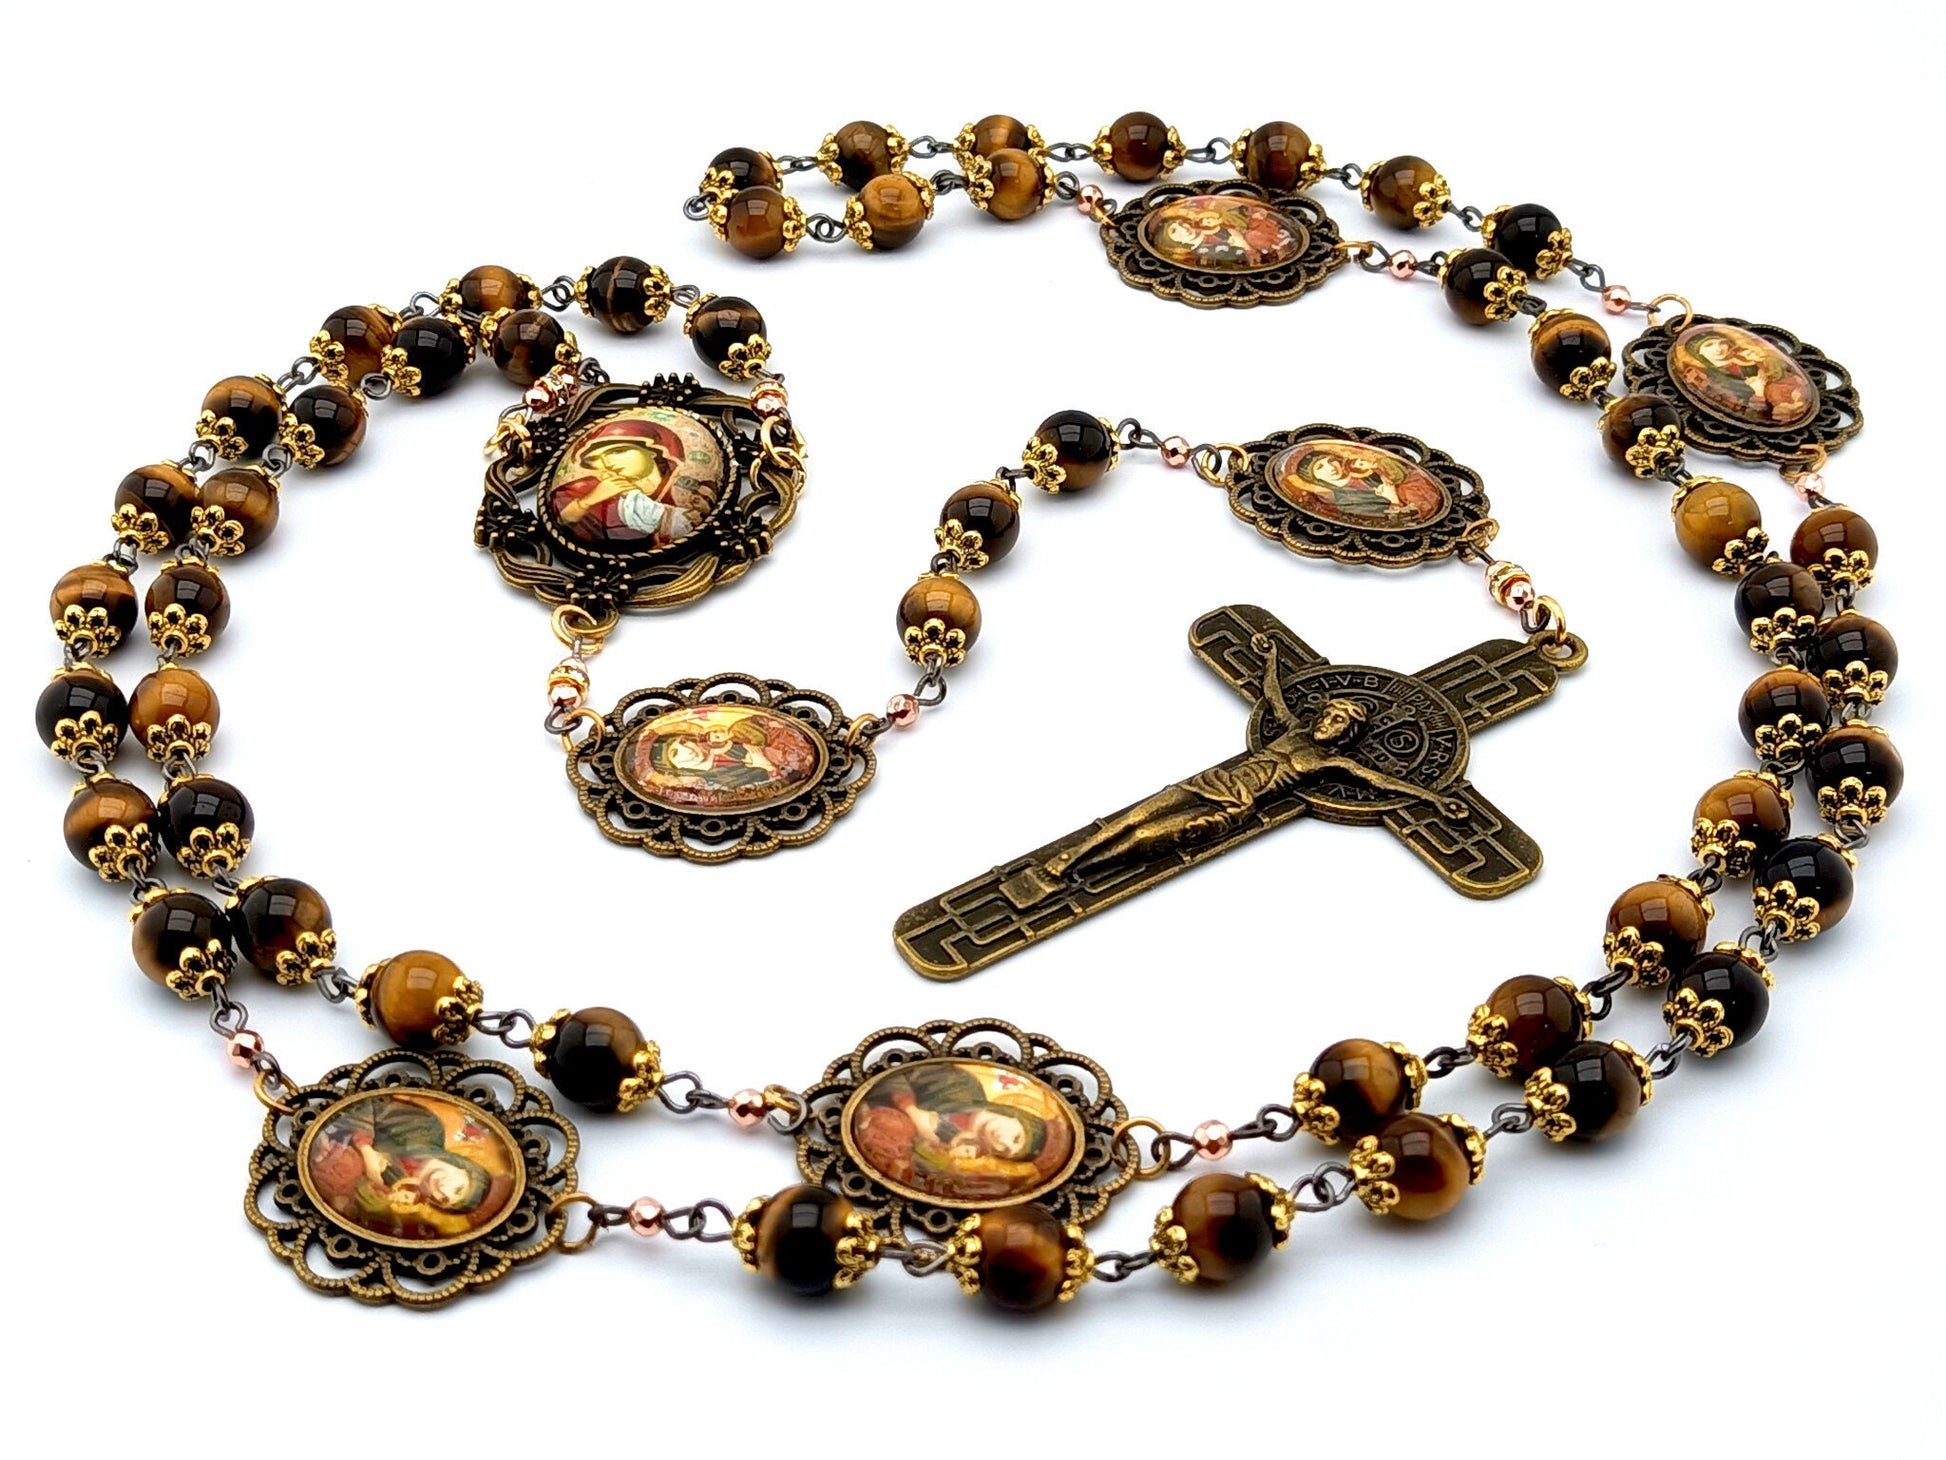 Our Lady of Perpetual Help unique rosary beads with tigers eye gemstone beads, picture medal pater beads, bronze crucifix and picture centre medal.